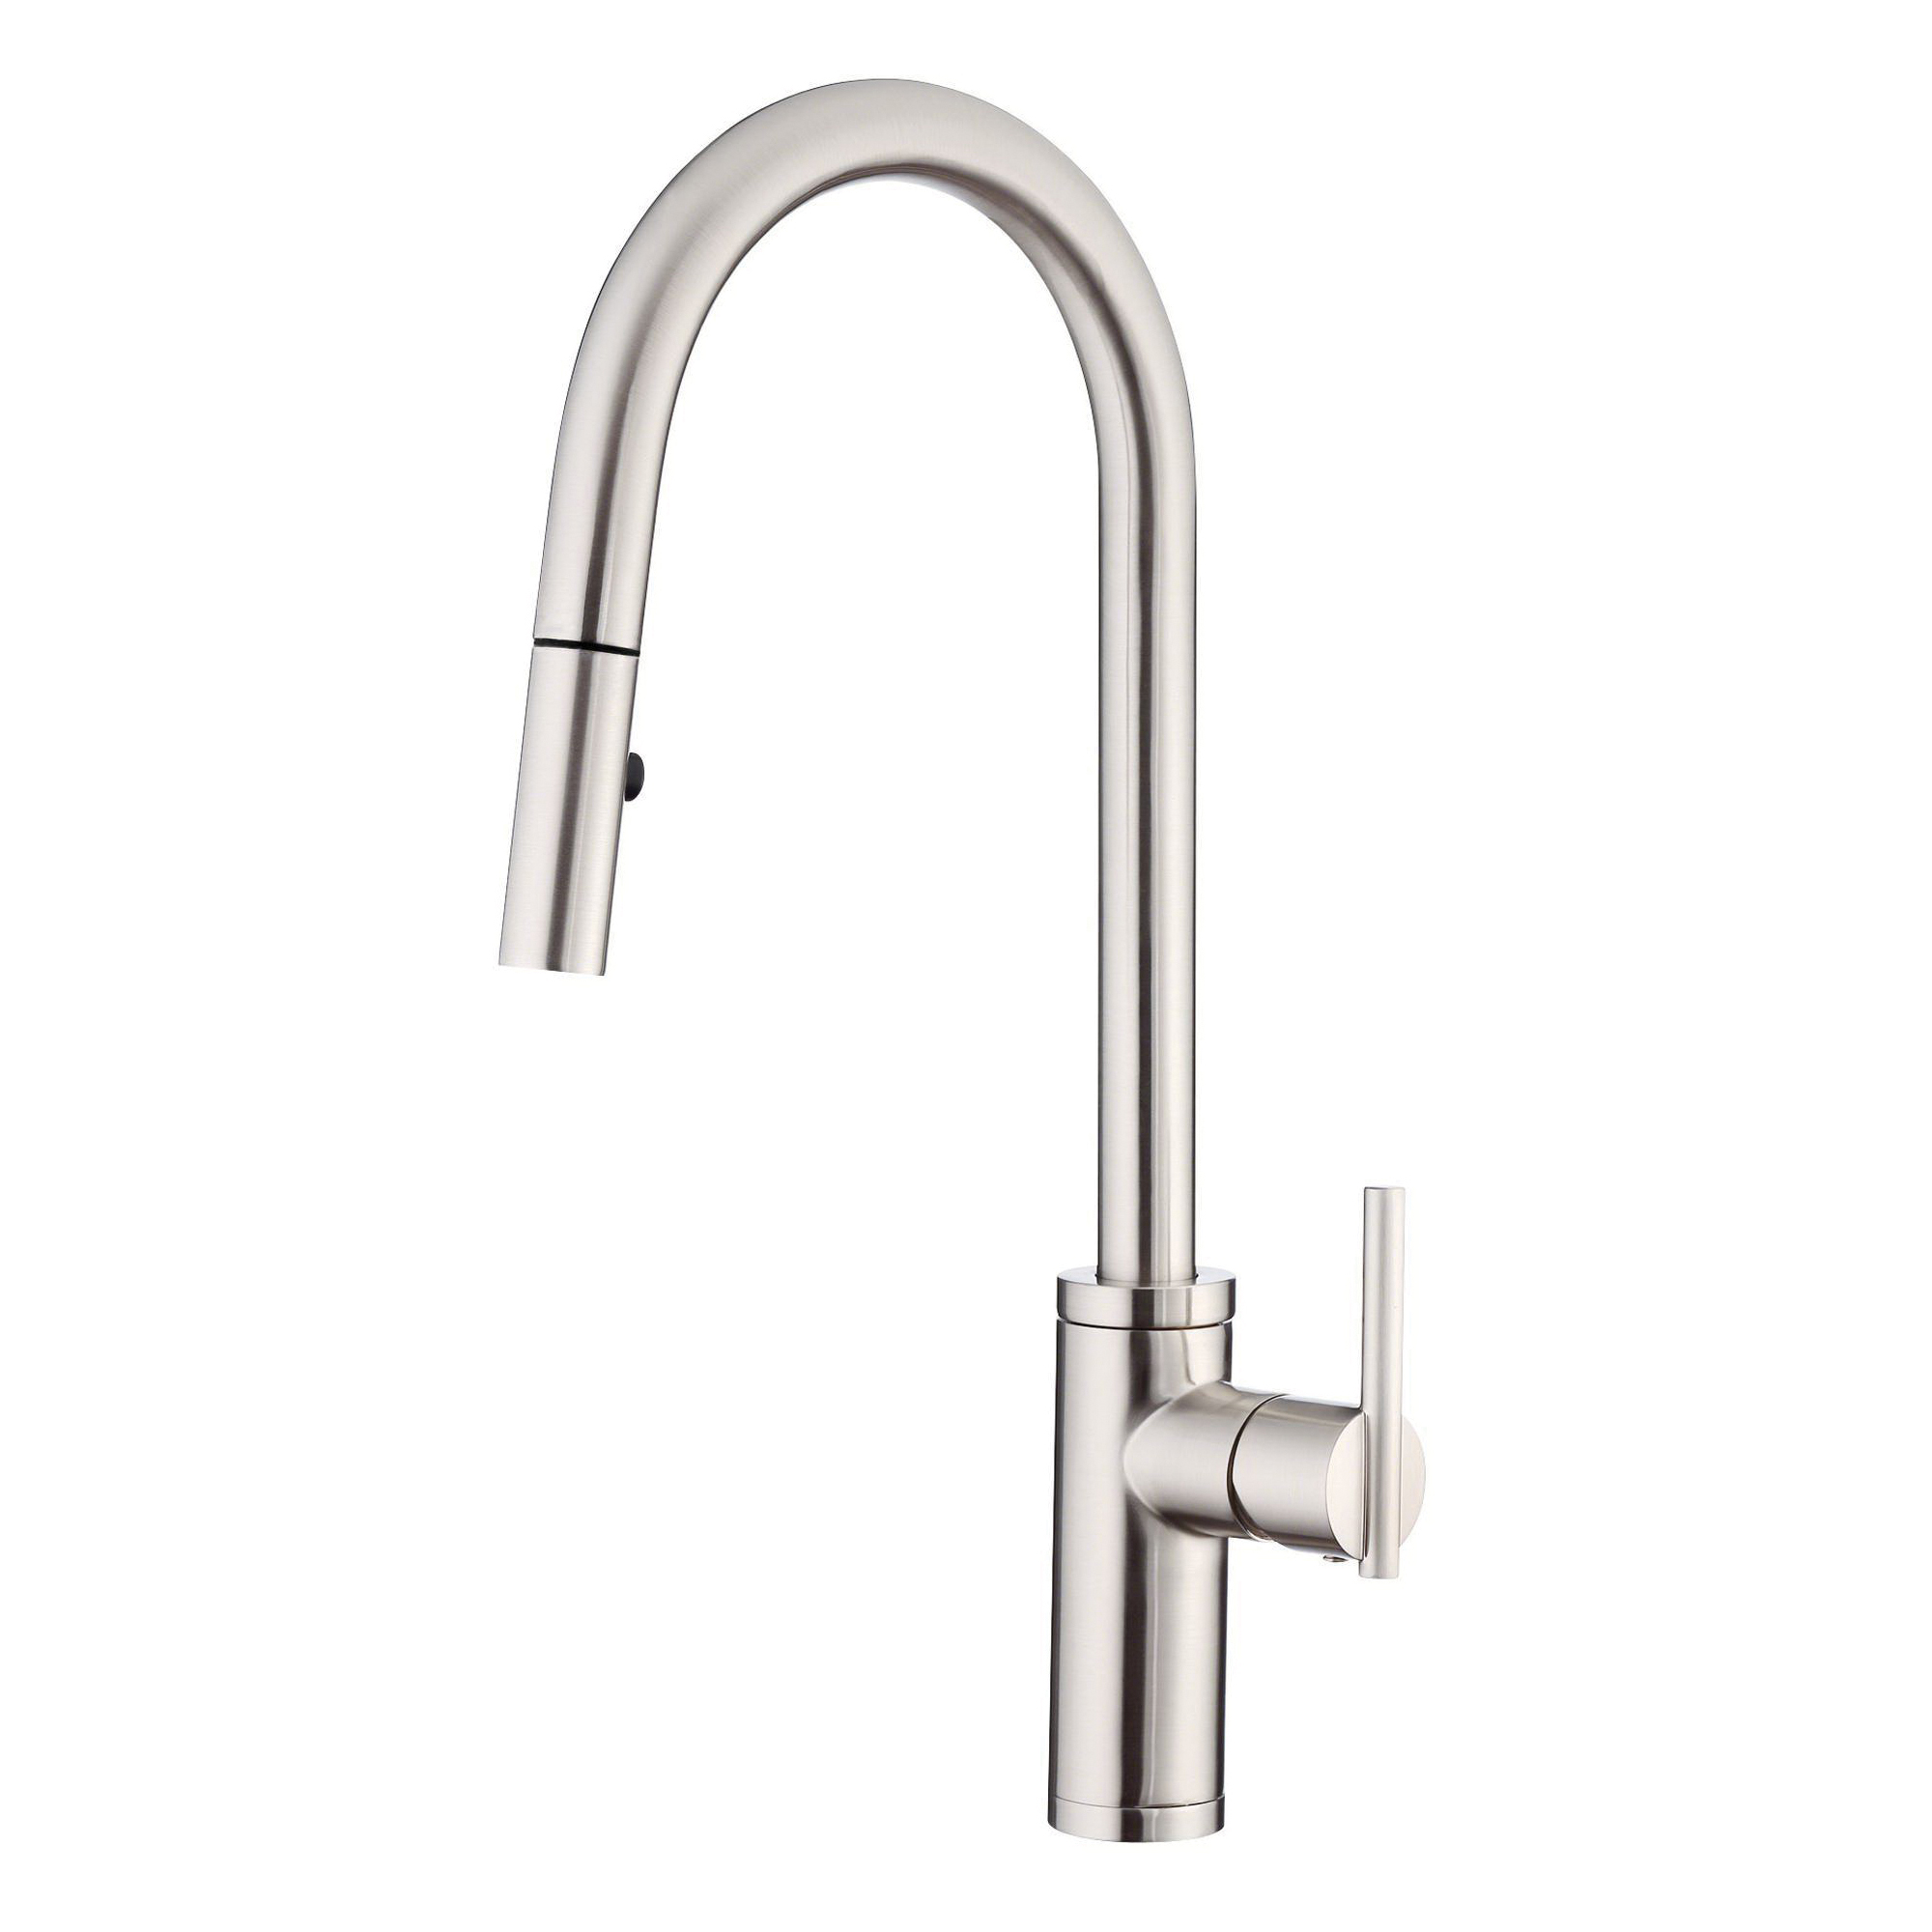 D454058ss Pull Down Kitchen Faucet With